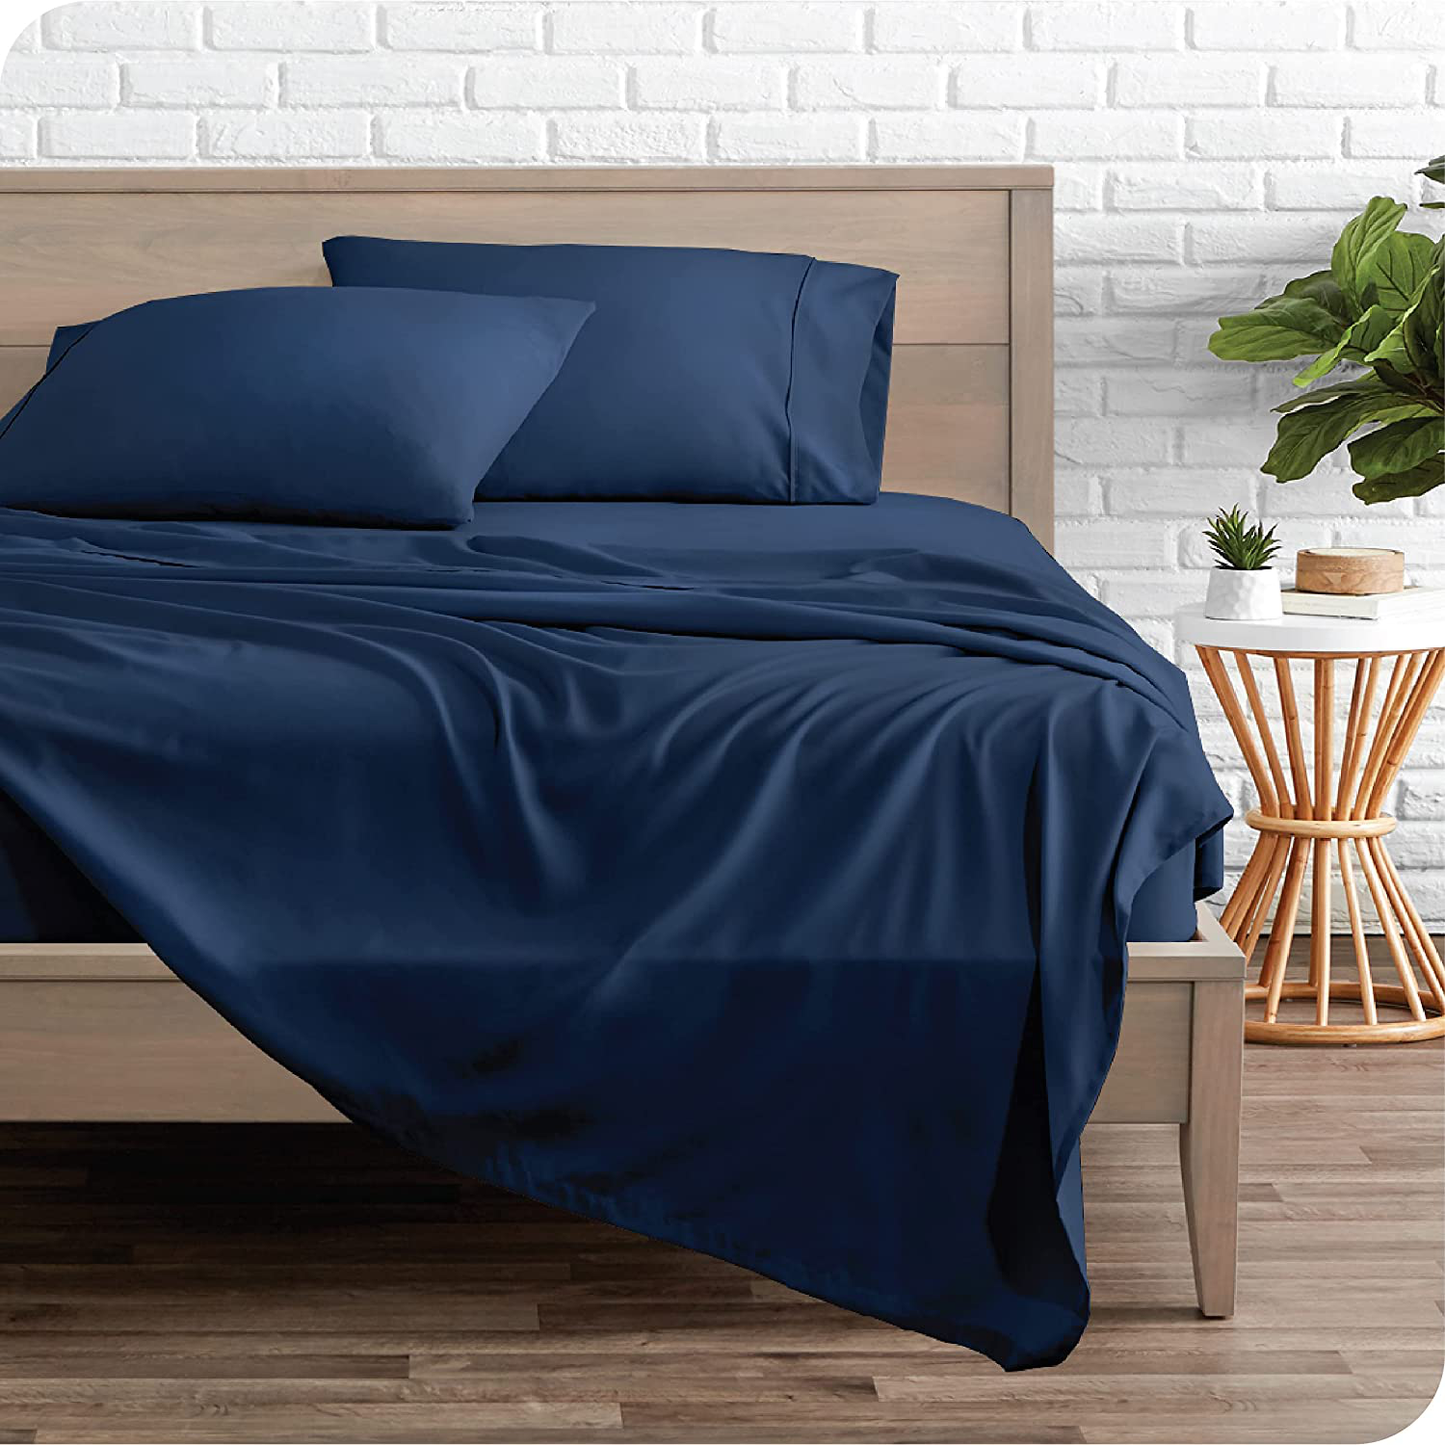 Bare Home Twin Sheet Set - 1800 Ultra-Soft Microfiber Twin Bed Sheets - Double Brushed - Twin Sheets Set - Deep Pocket - Bedding Sheets & Pillowcases (Twin, Dark Blue)